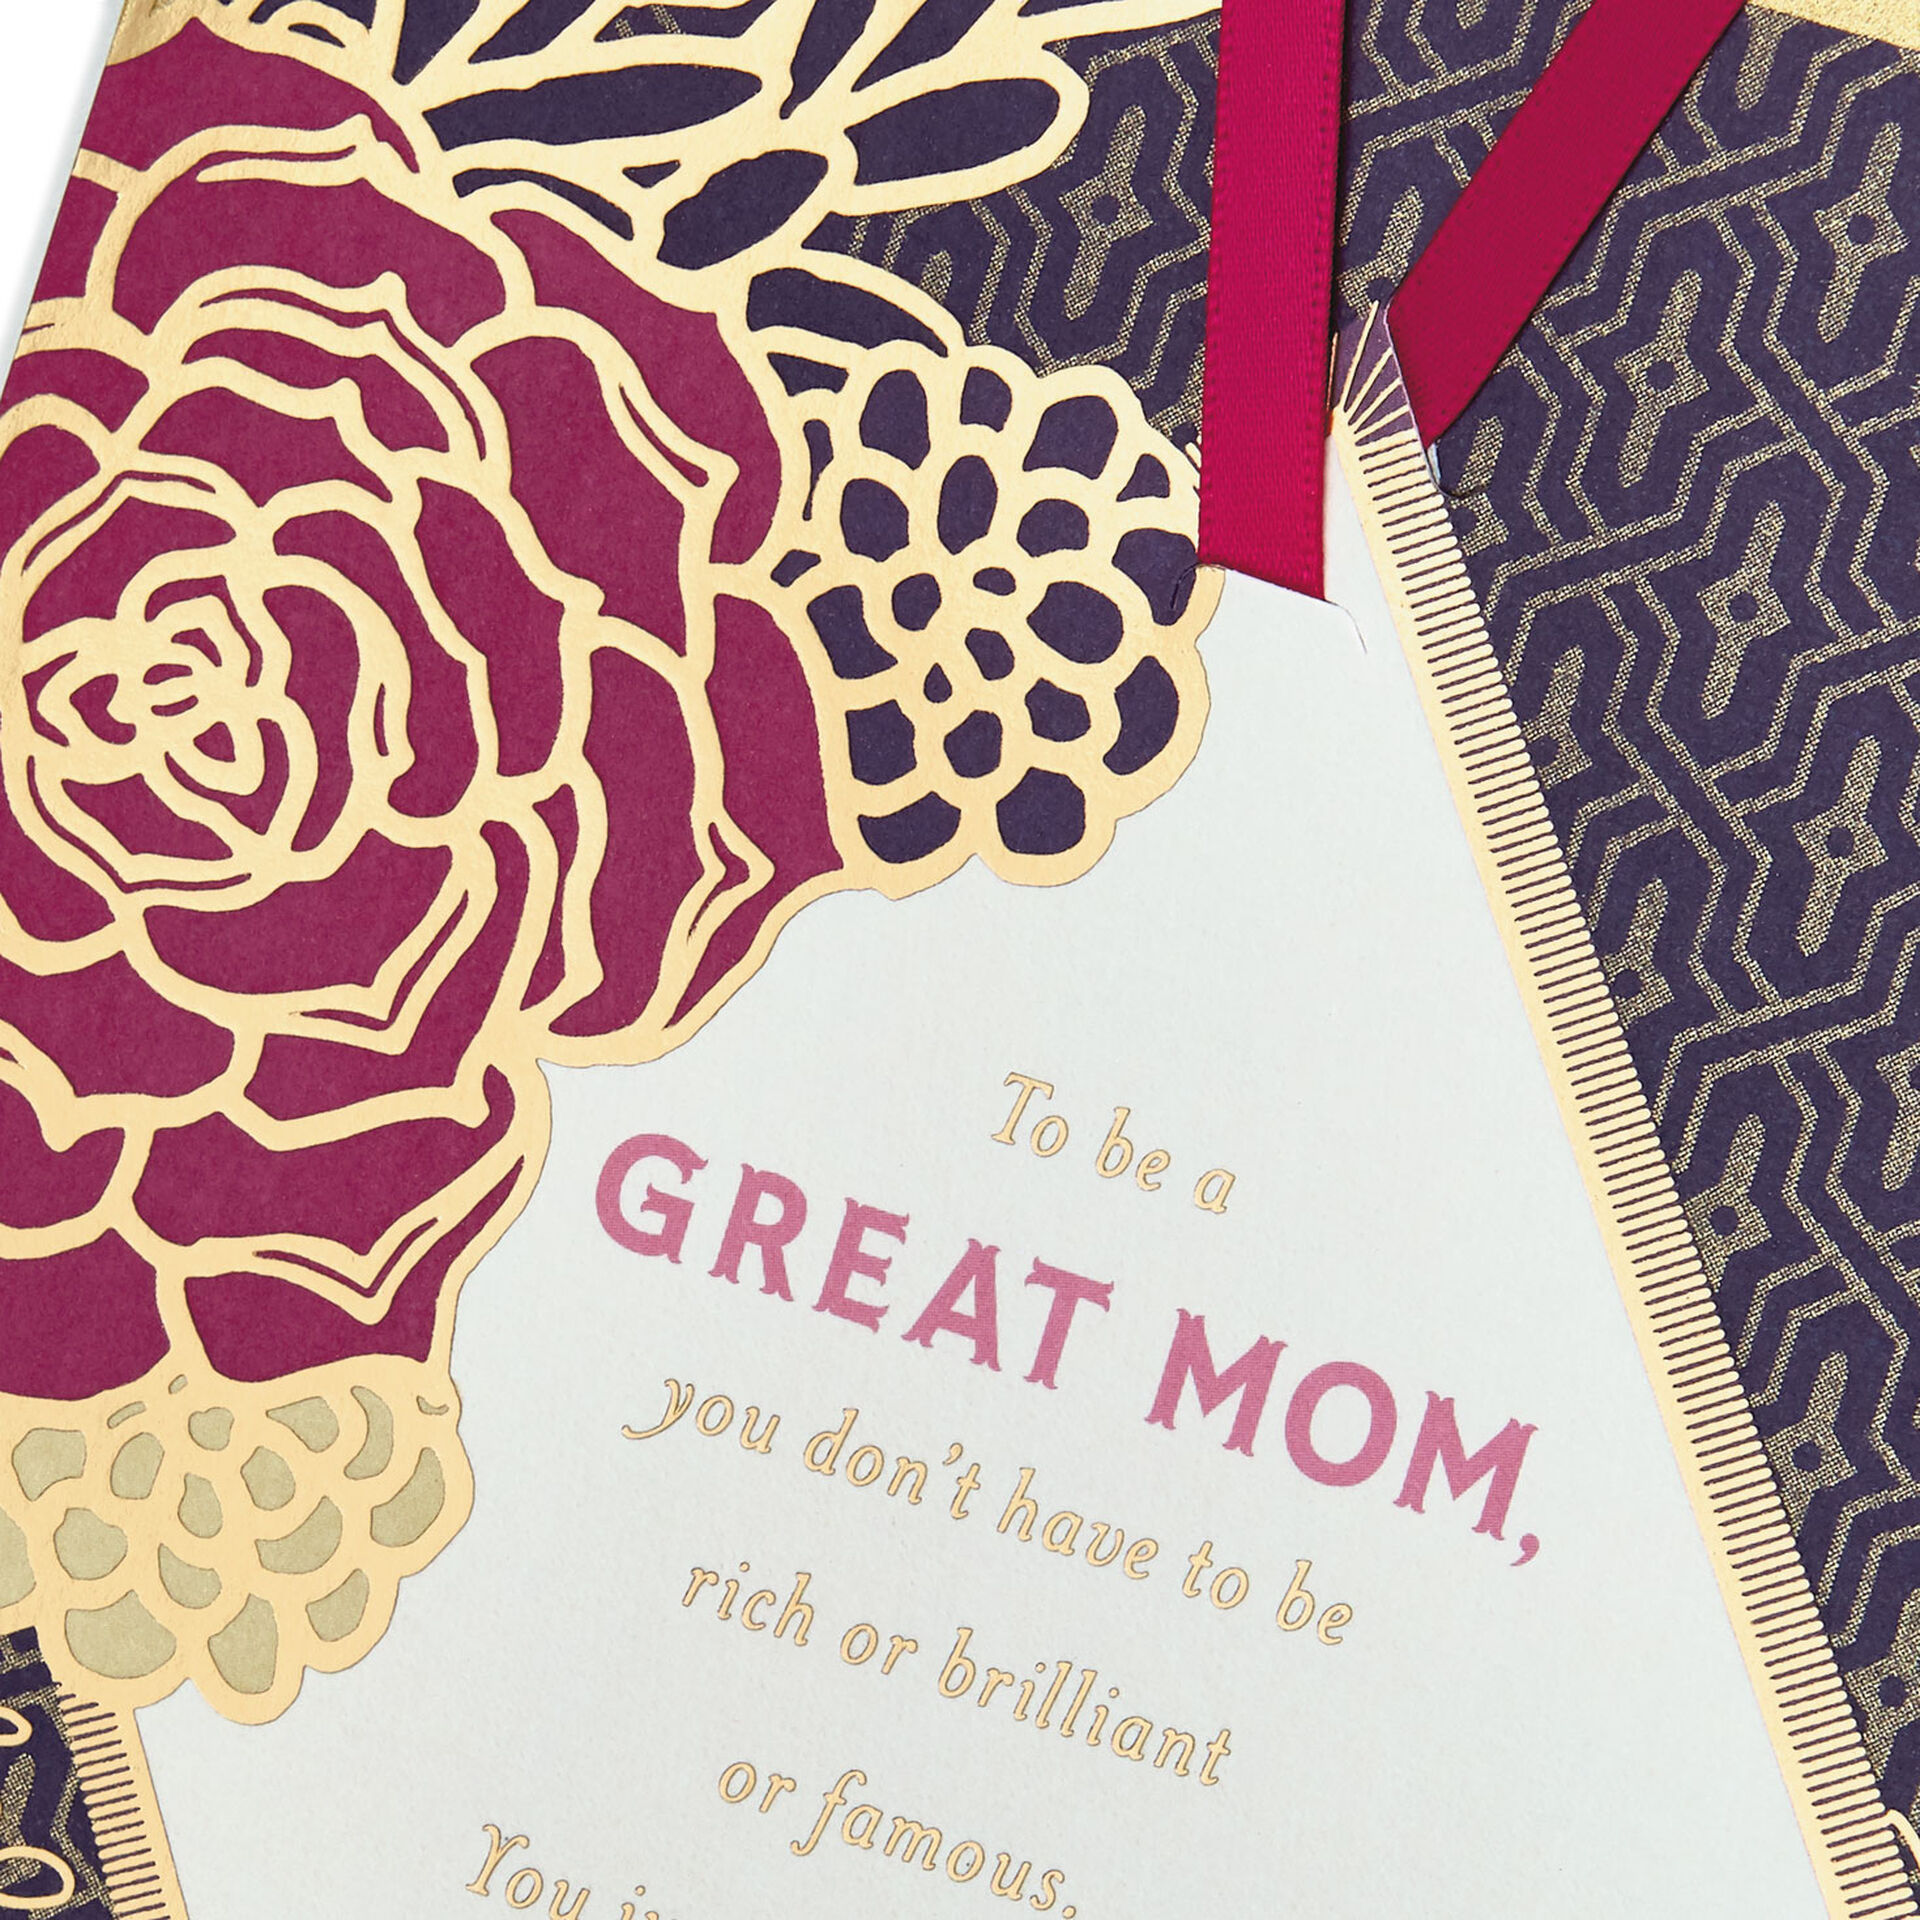 Youre An Amazing Mom Mothers Day Card Greeting Cards Hallmark 